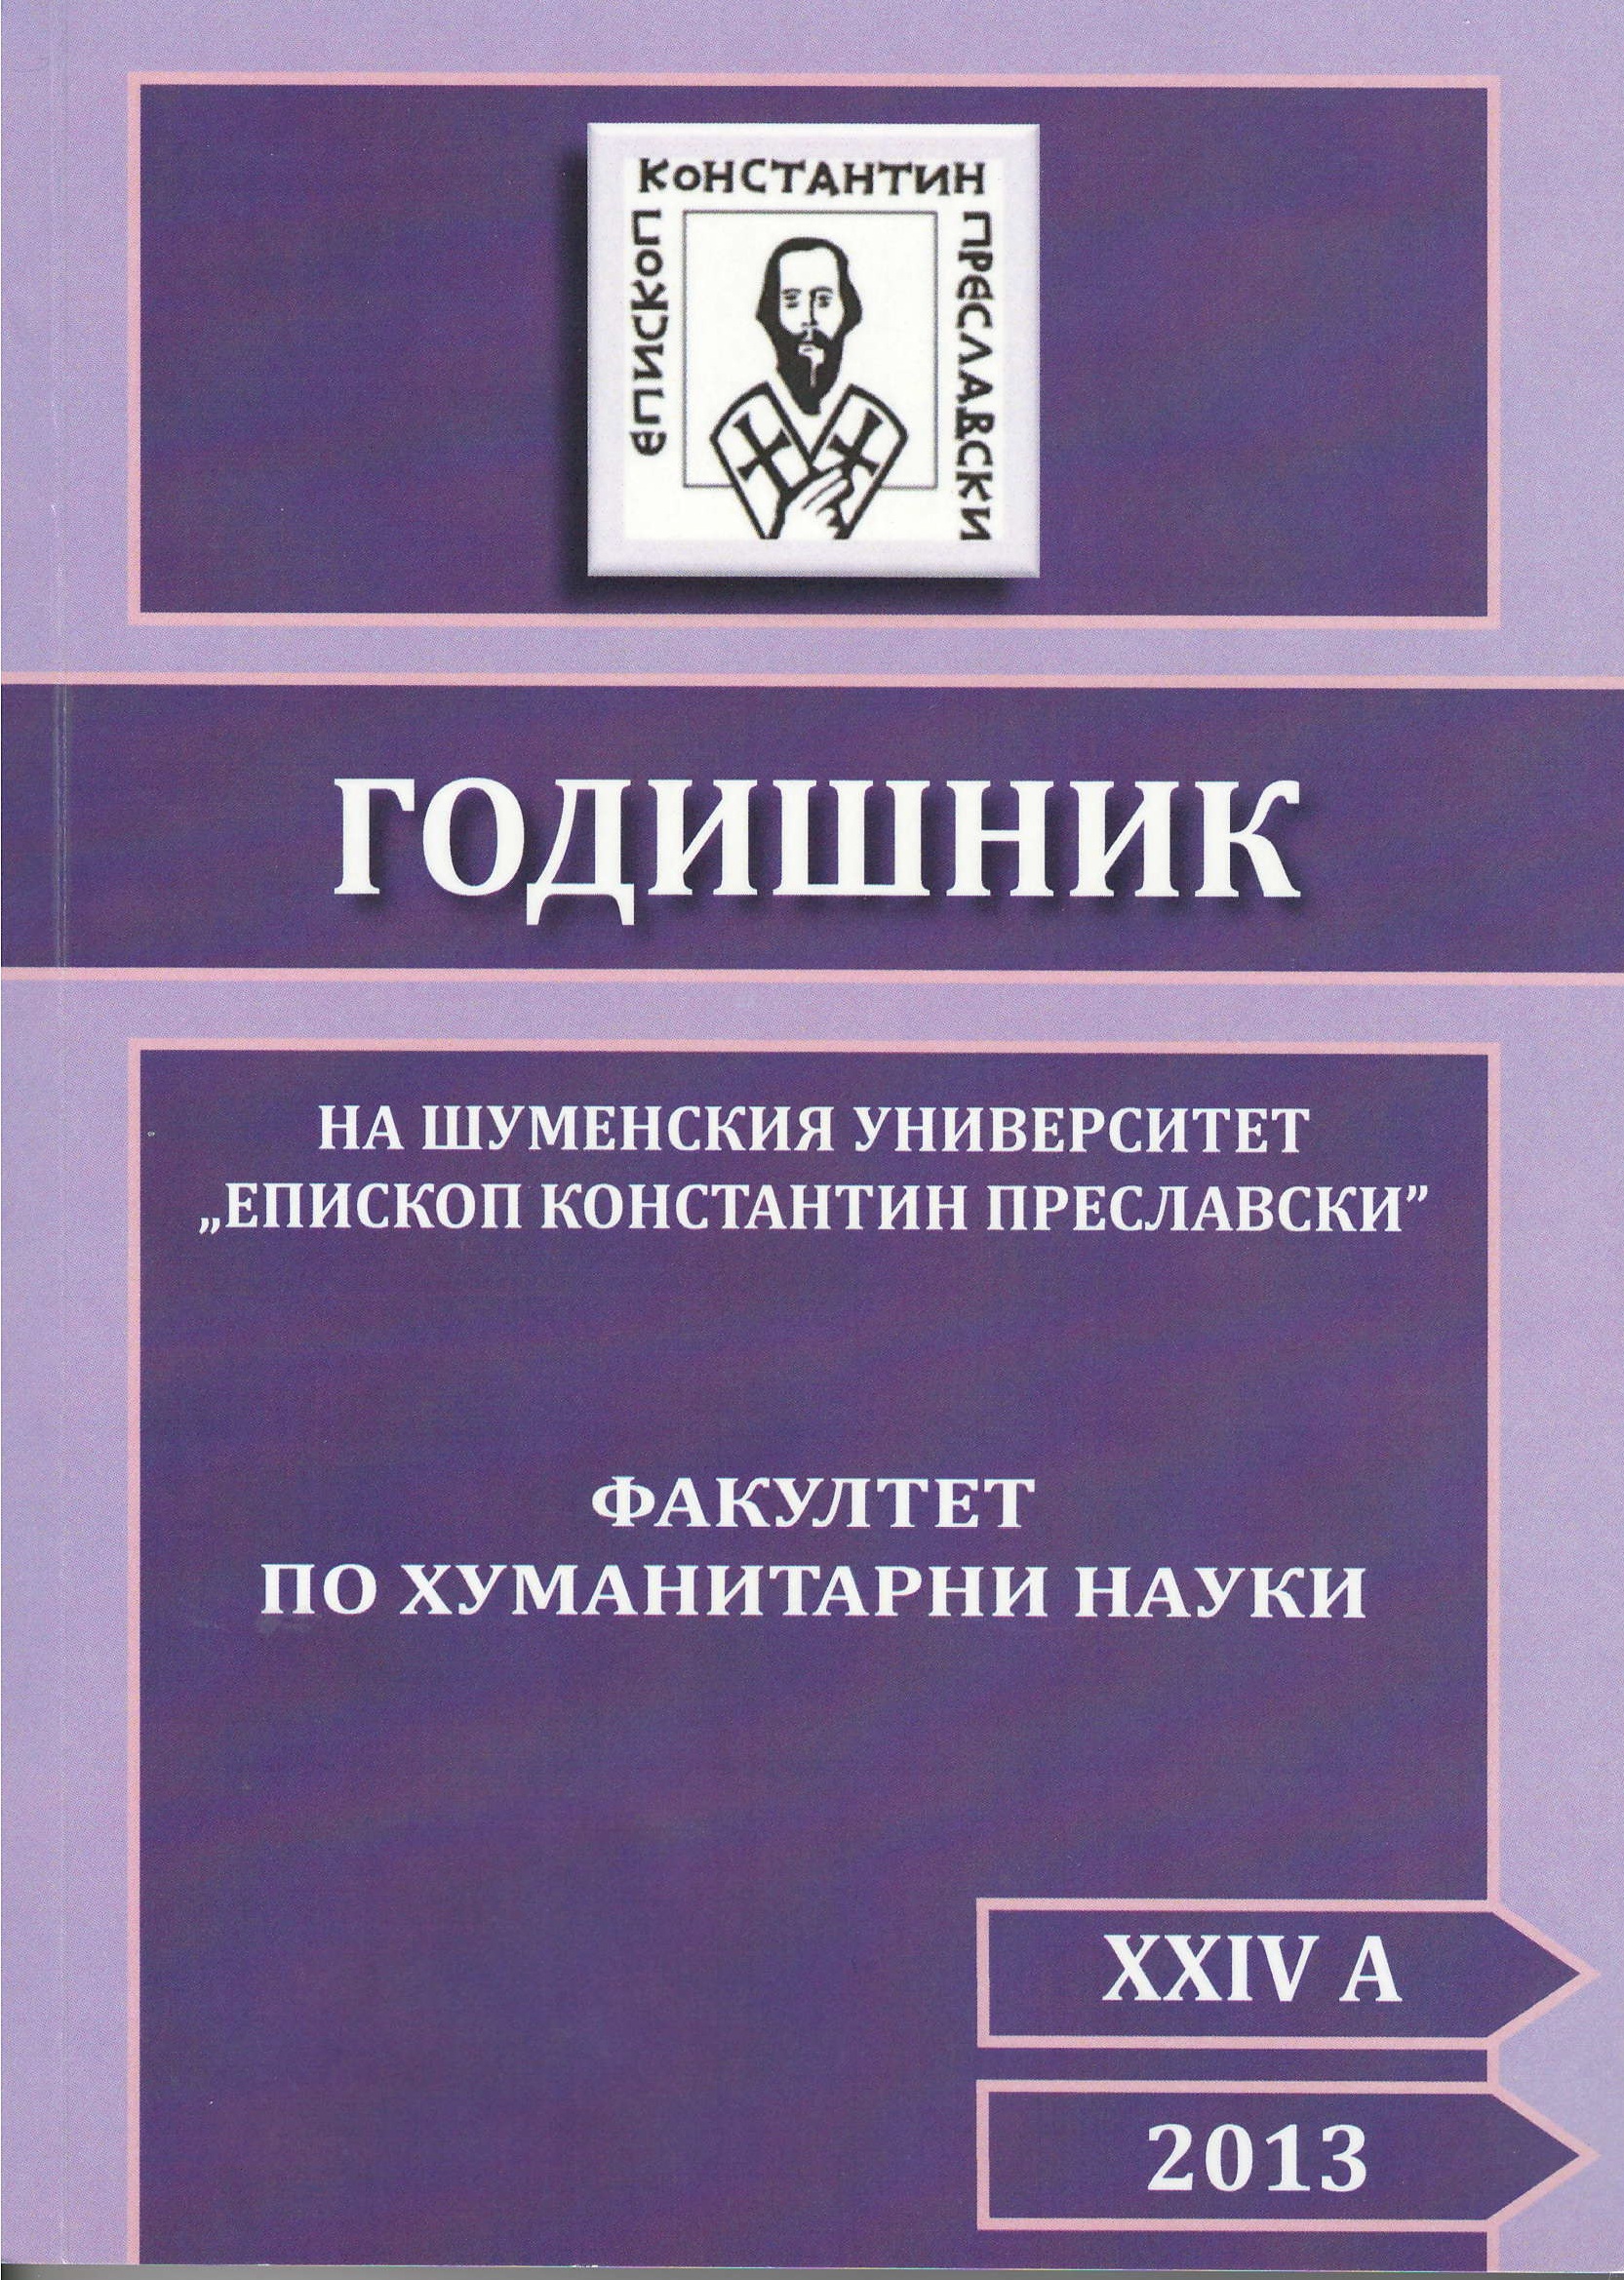 Theoretical and practical aspects of morphological analysis in Bulgarian language education (5. - 7. Grade) Cover Image